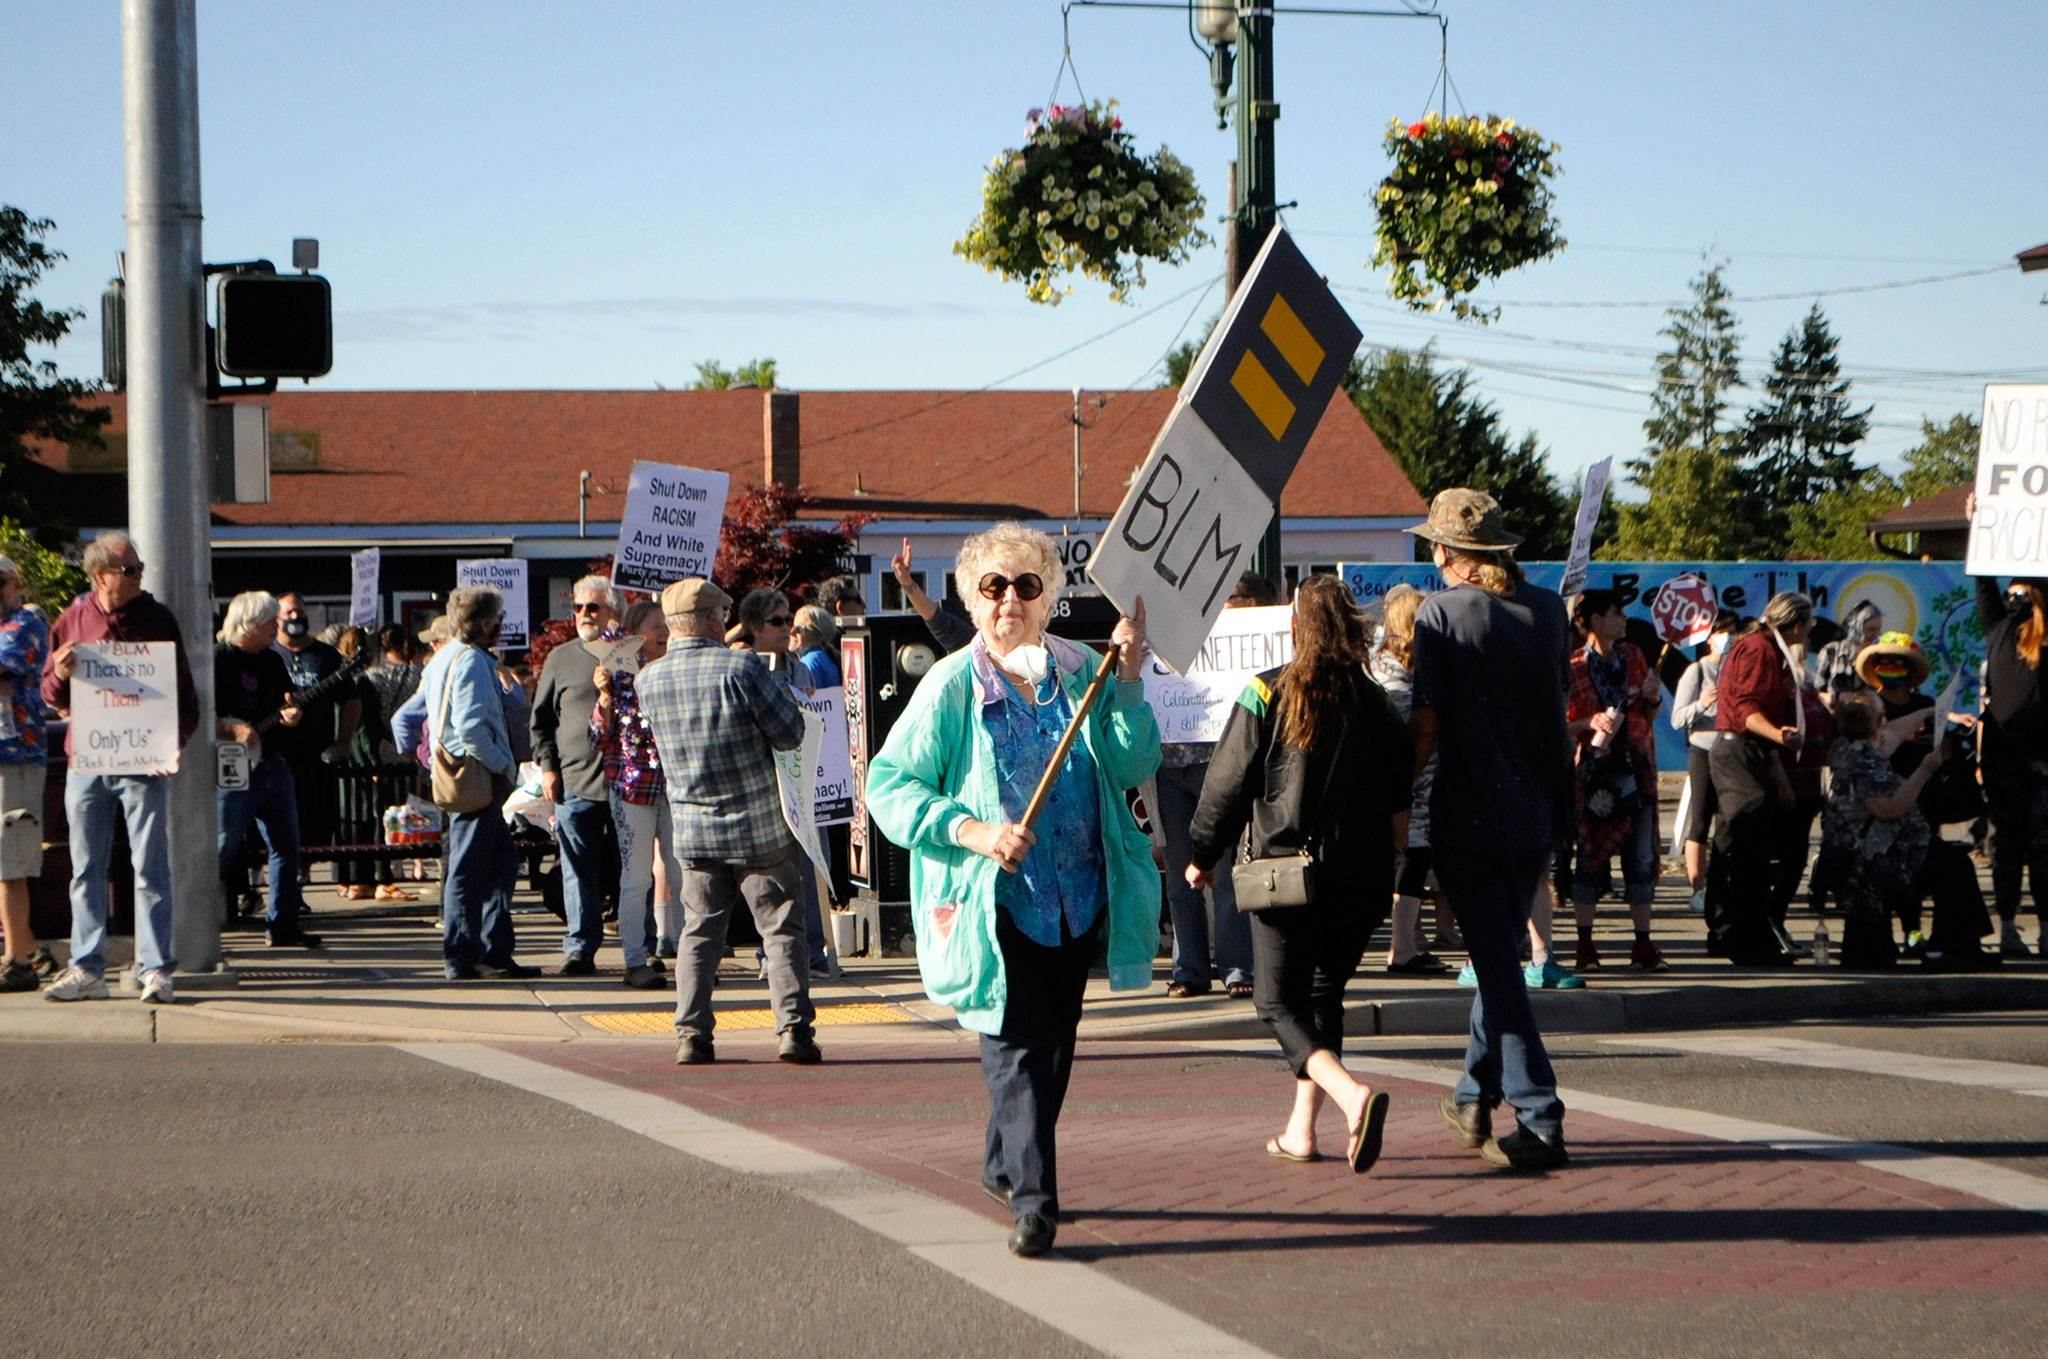 Suzi Morris of Sequim walks with a sign during a protest on Saturday in downtown Sequim recognizing Juneteenth, and condemning racism. “We need keep sharing the message, that’s what we can do,” she said. “We can’t be quiet because that’s just supporting it.” Sequim Gazette photo by Matthew Nash